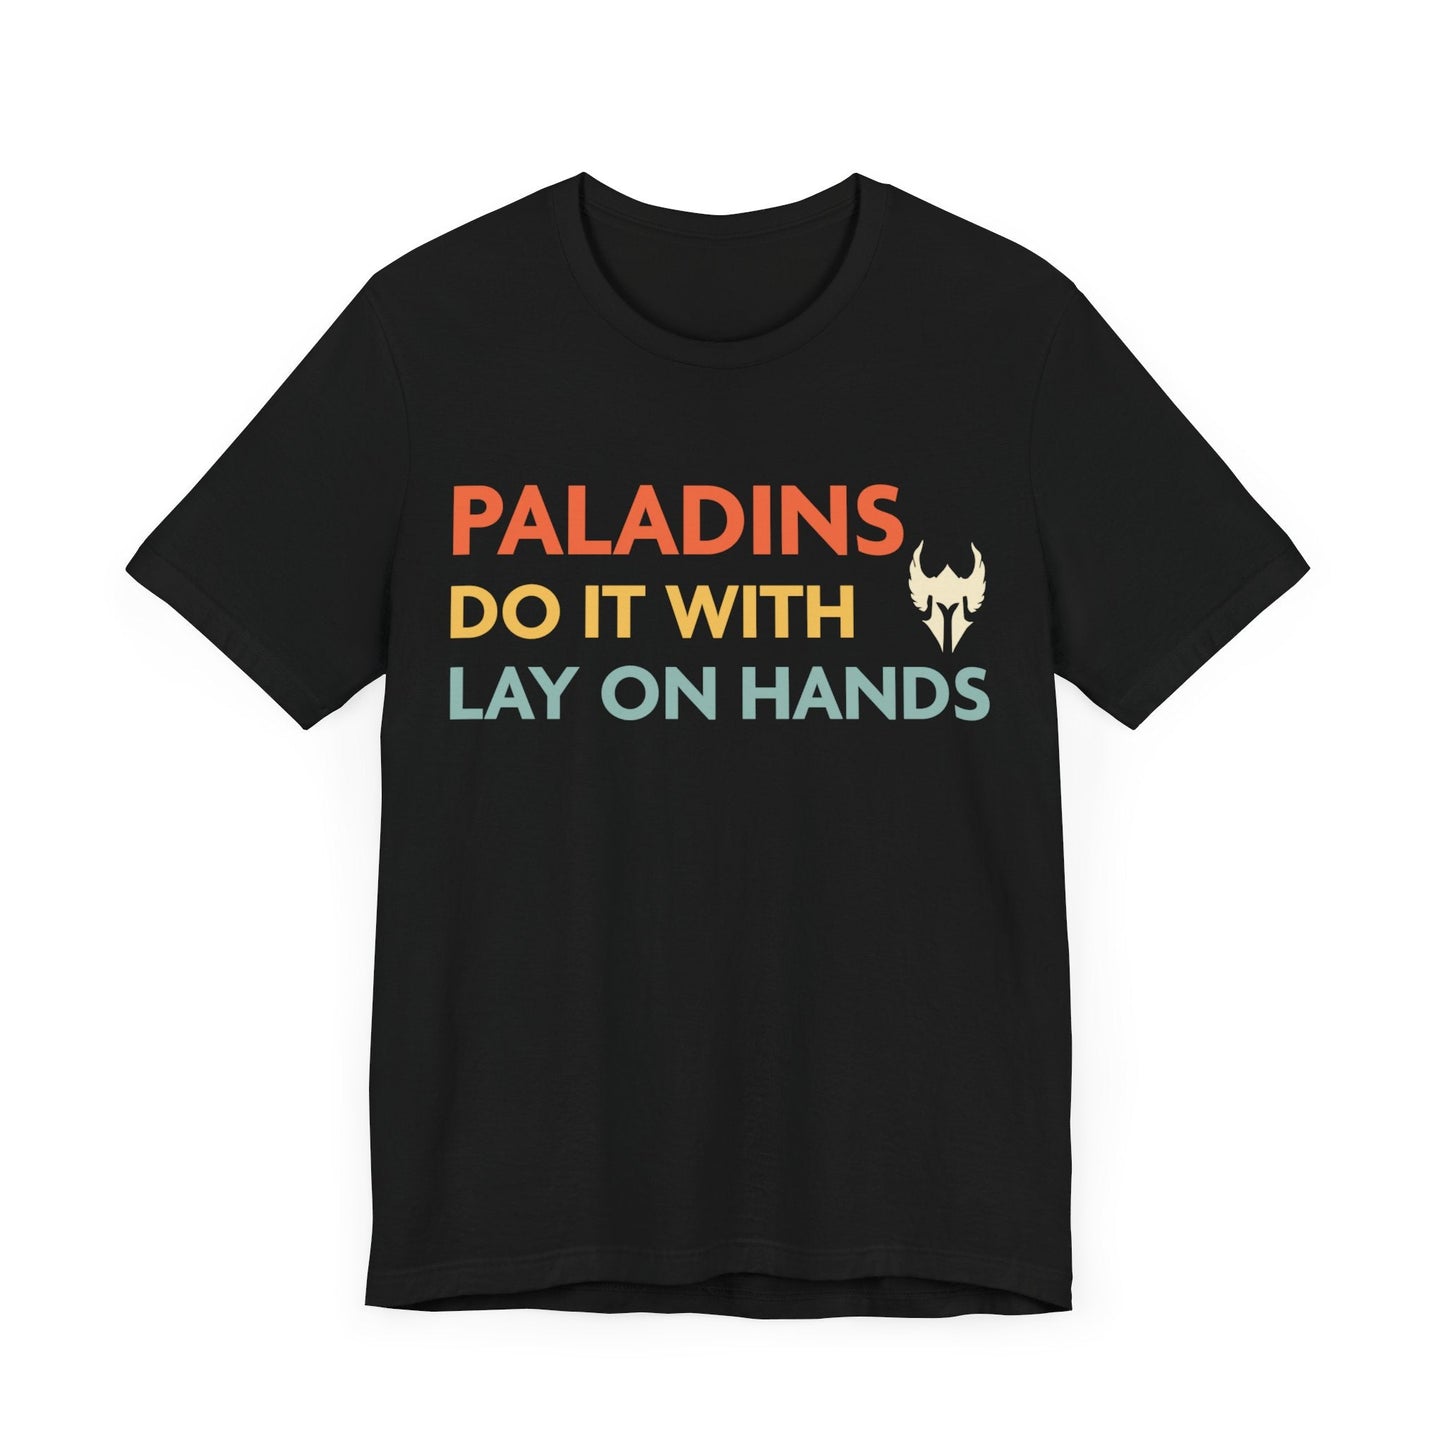 DnD Paladins Do It With Lay On Hands Shirt T-Shirt Black / S